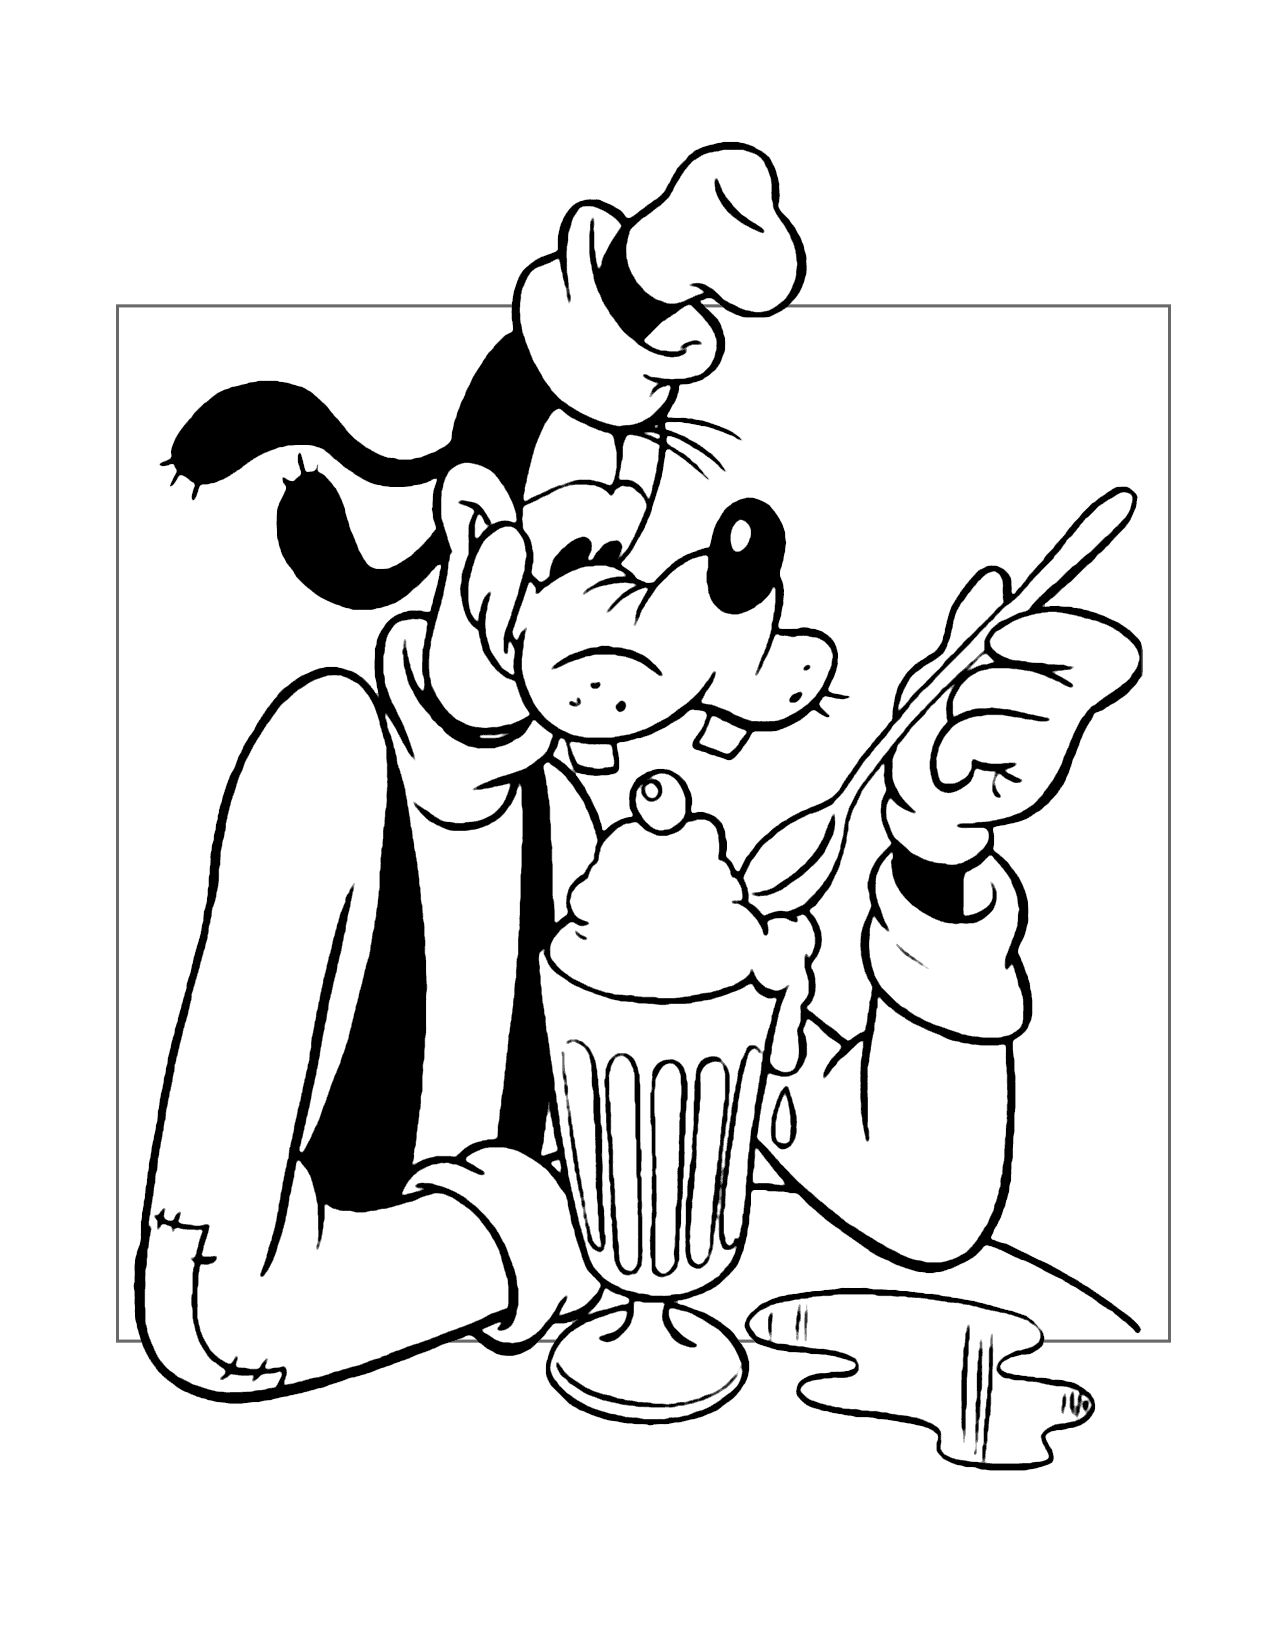 Goofy Eats Ice Cream Coloring Page